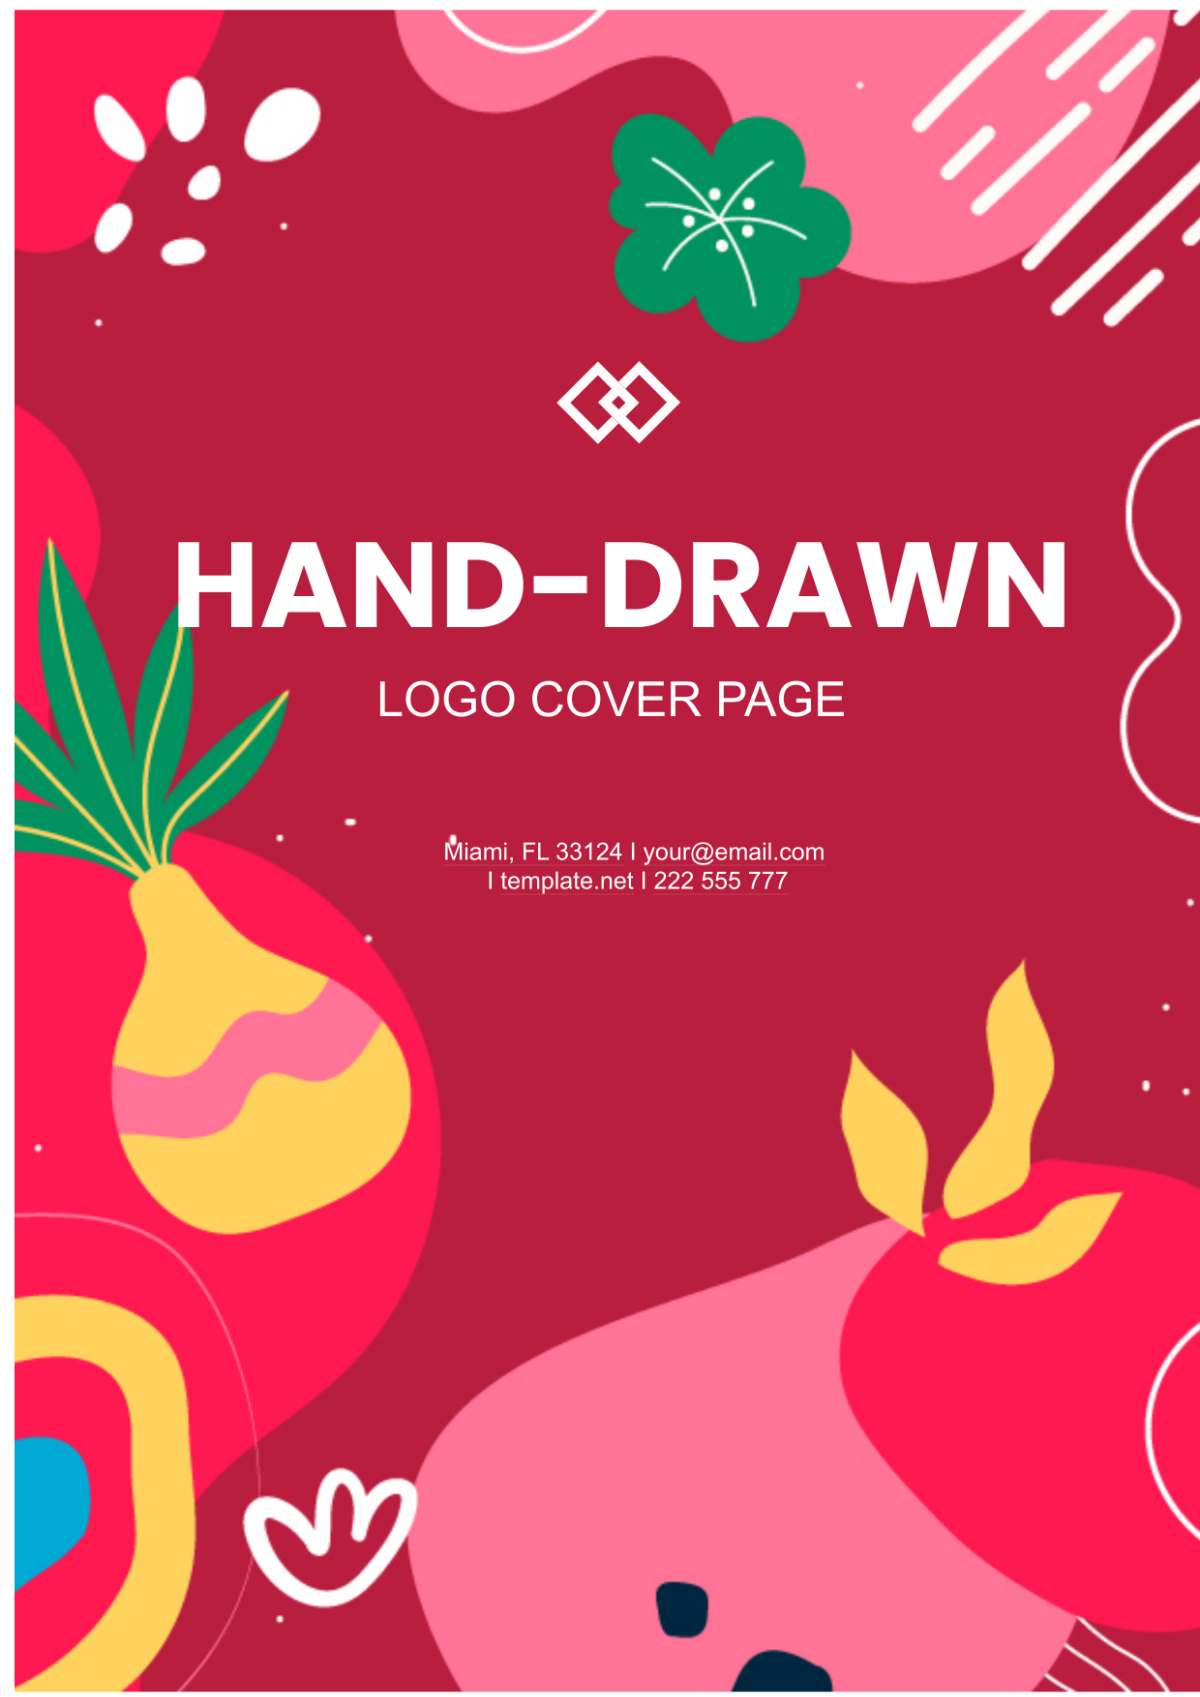 Hand-Drawn Logo Cover Page Template